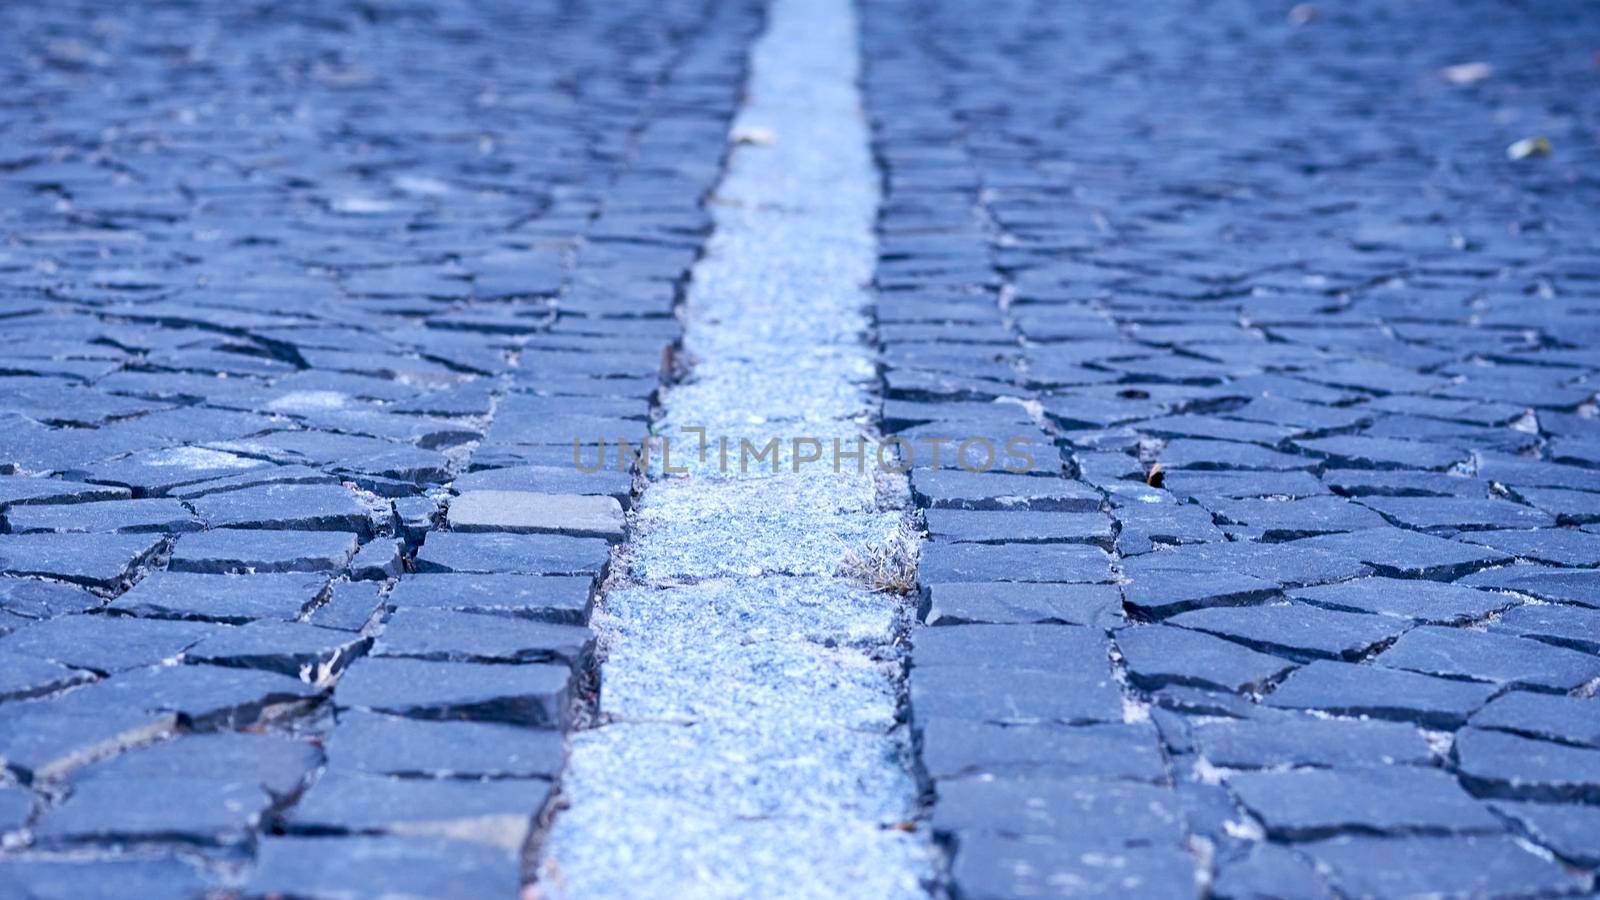 of a piece of ground, covered with concrete, asphalt, stones, or bricks.Paving stones. Cobblestone pavement divided by a granite strip close-up.